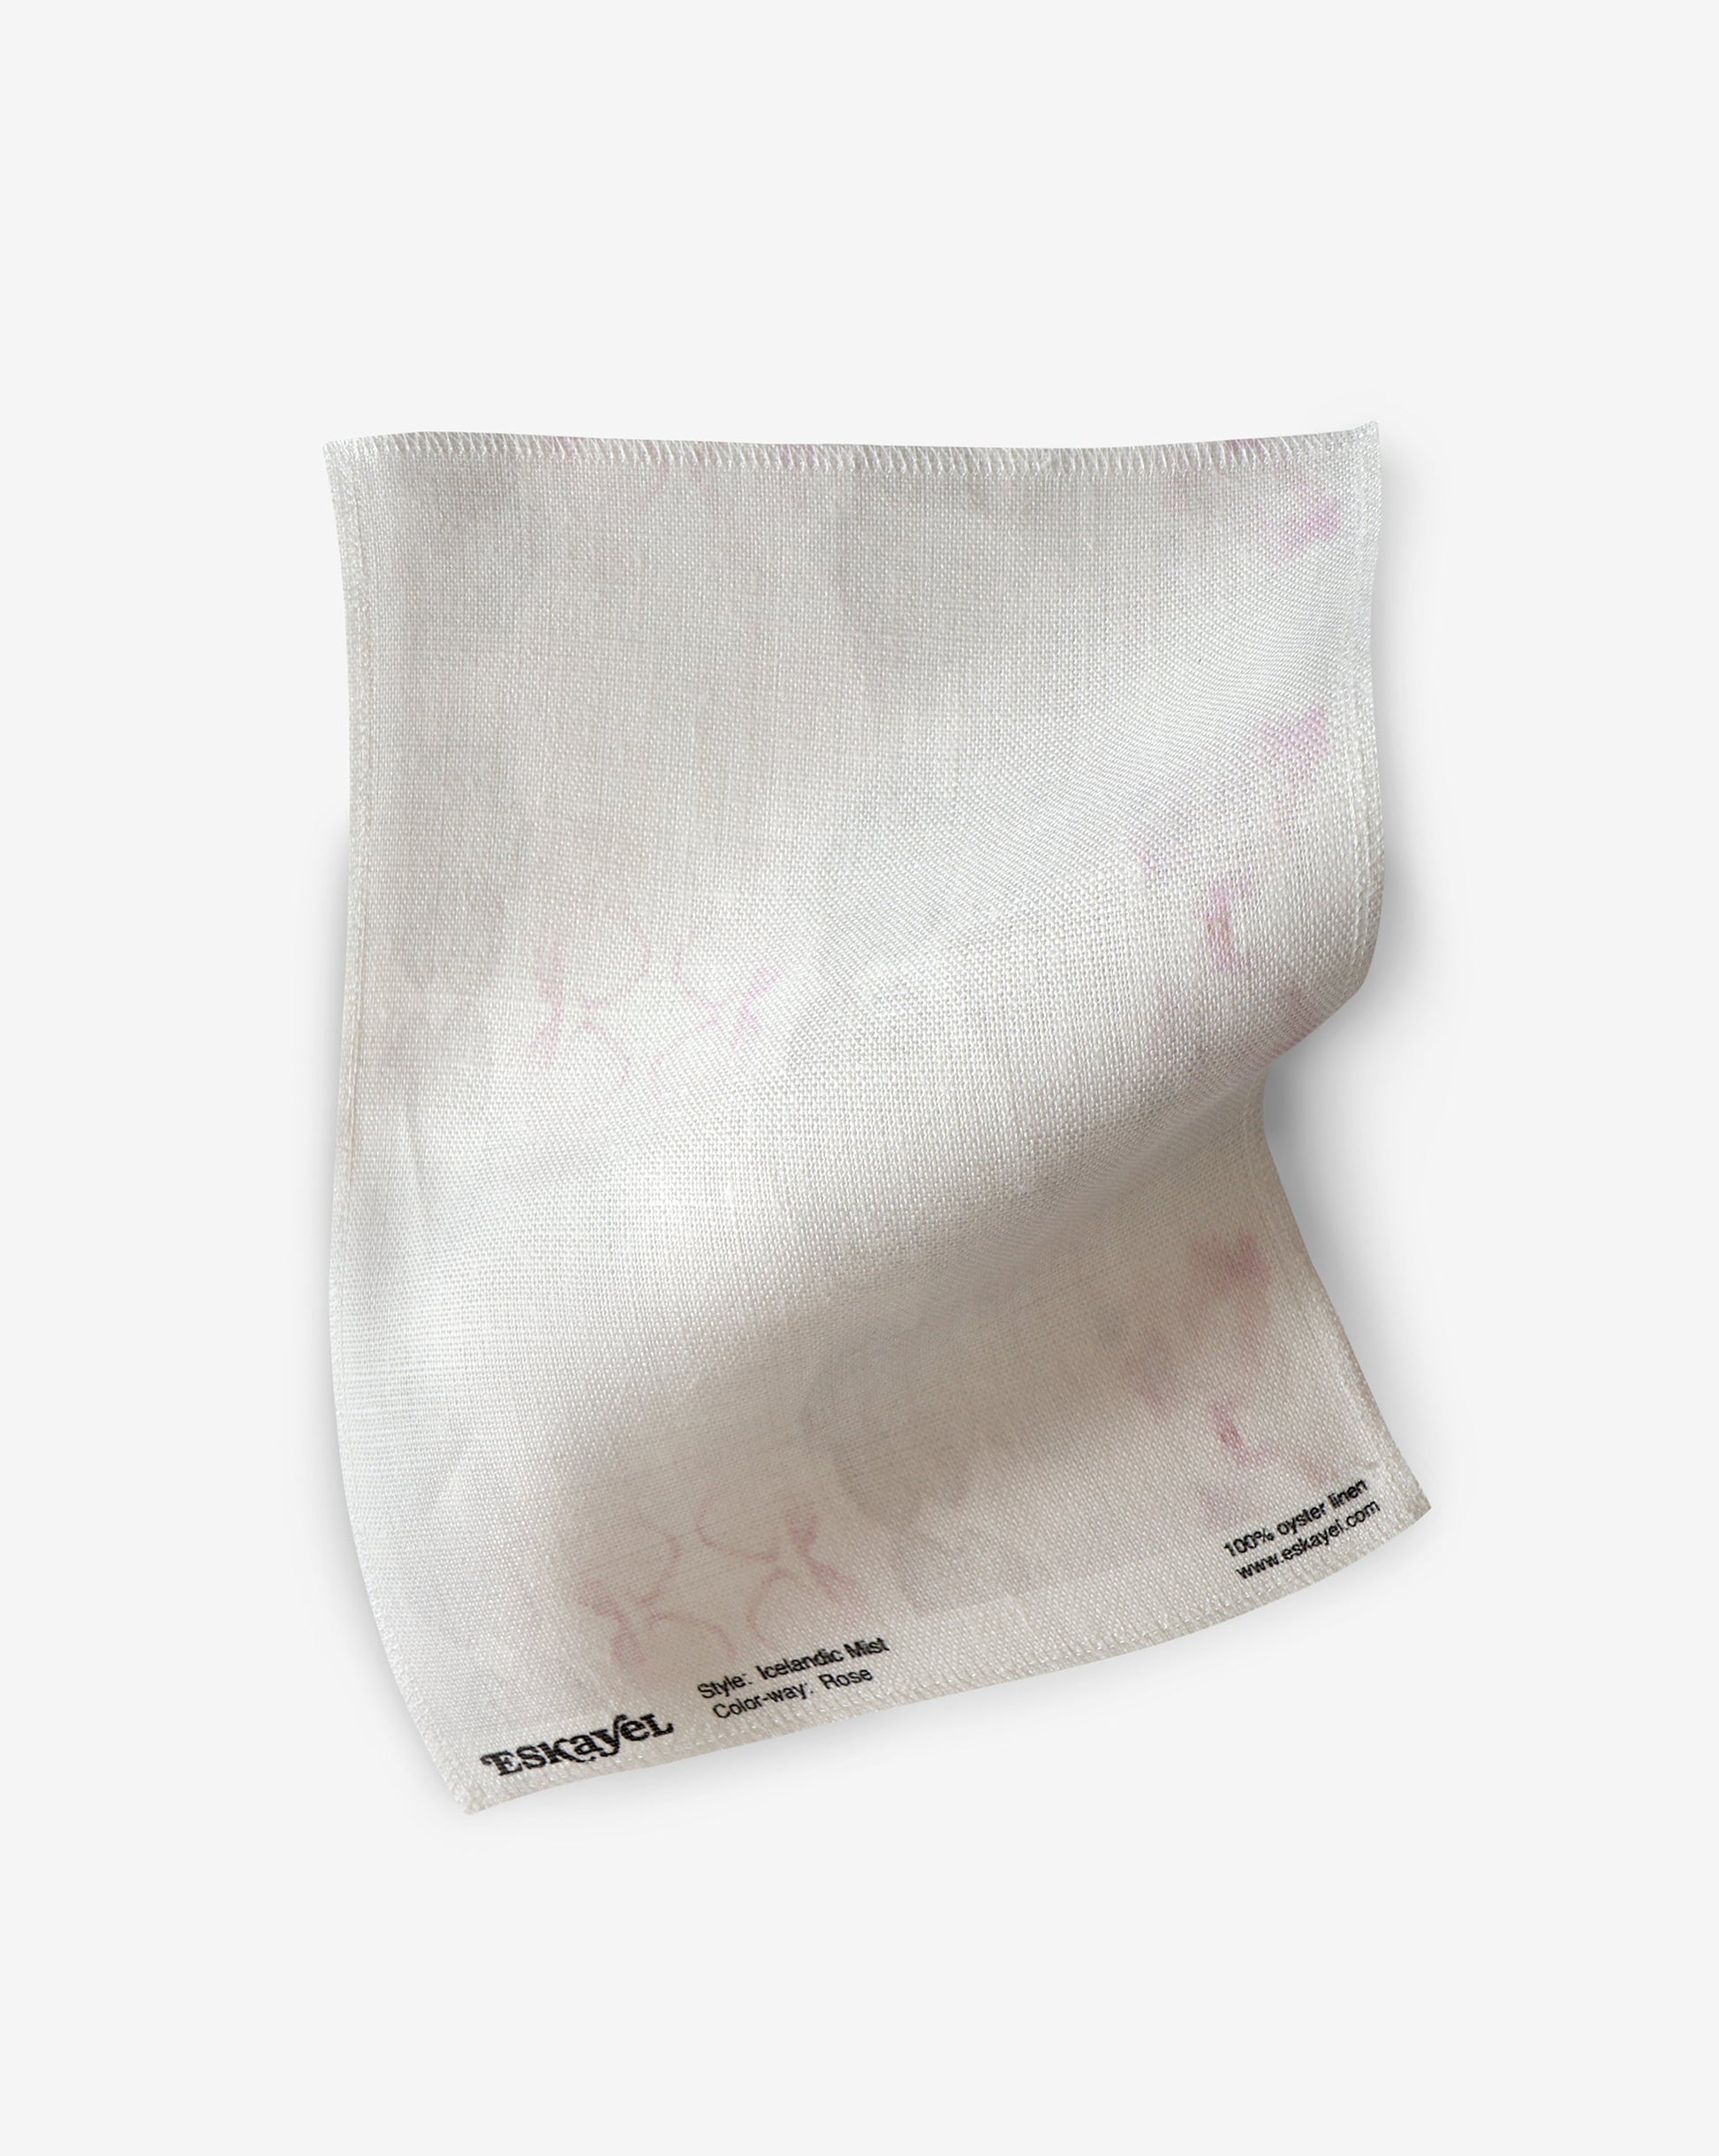 A pink and white Icelandic Mist Fabric Rose fabric on a high-end luxury fabric surface